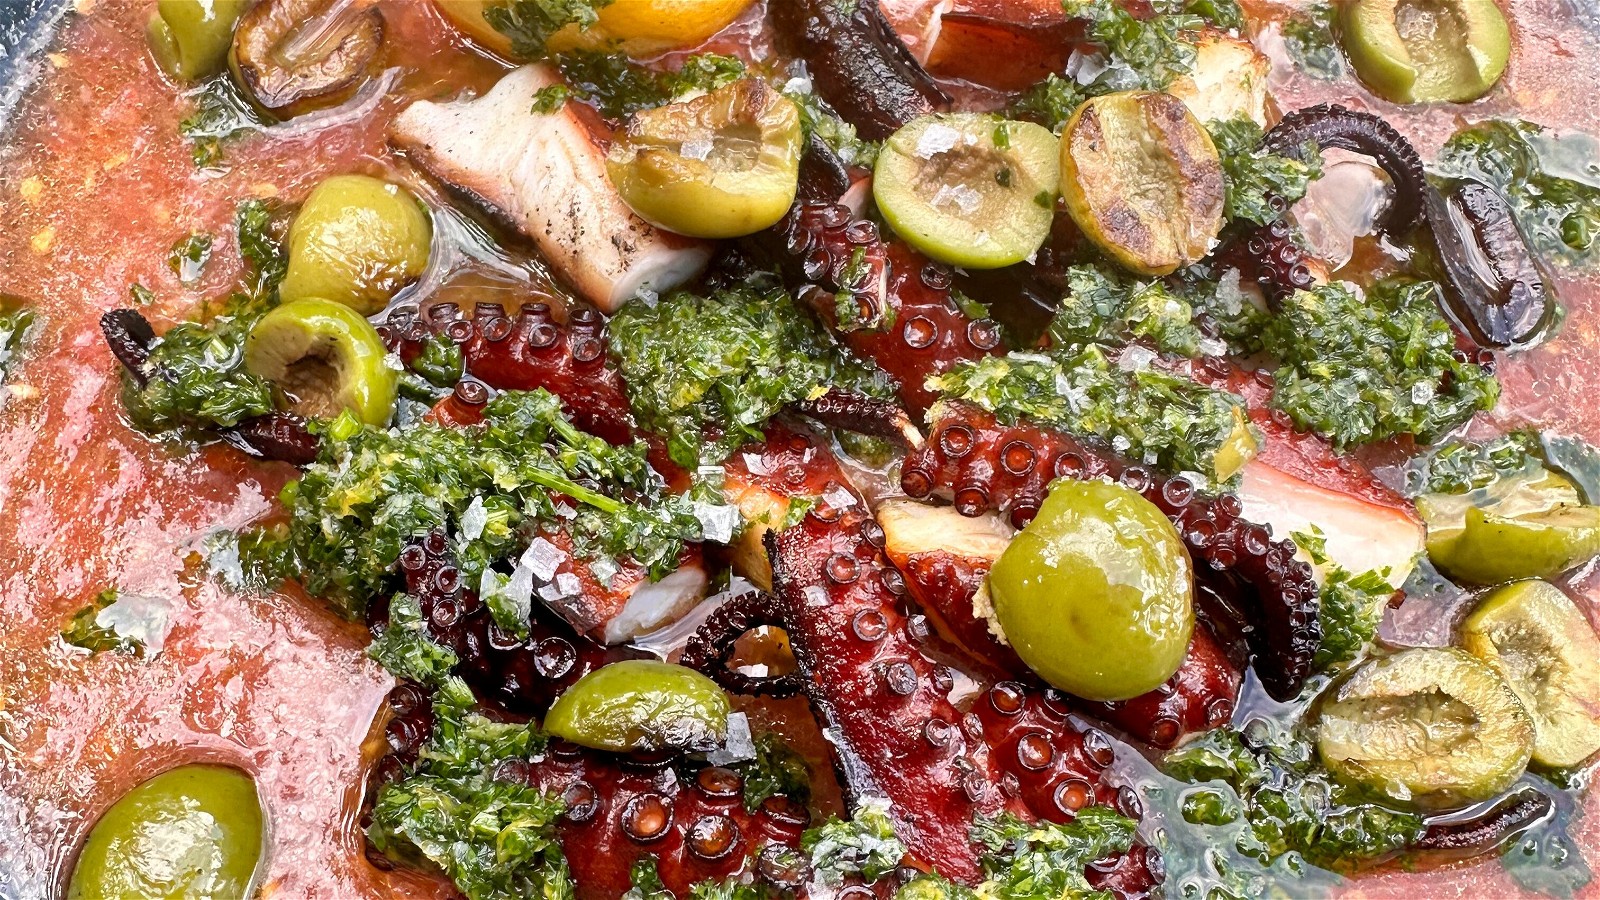 Image of Smoked and Grilled Spanish Octopus with Olives and Tomates